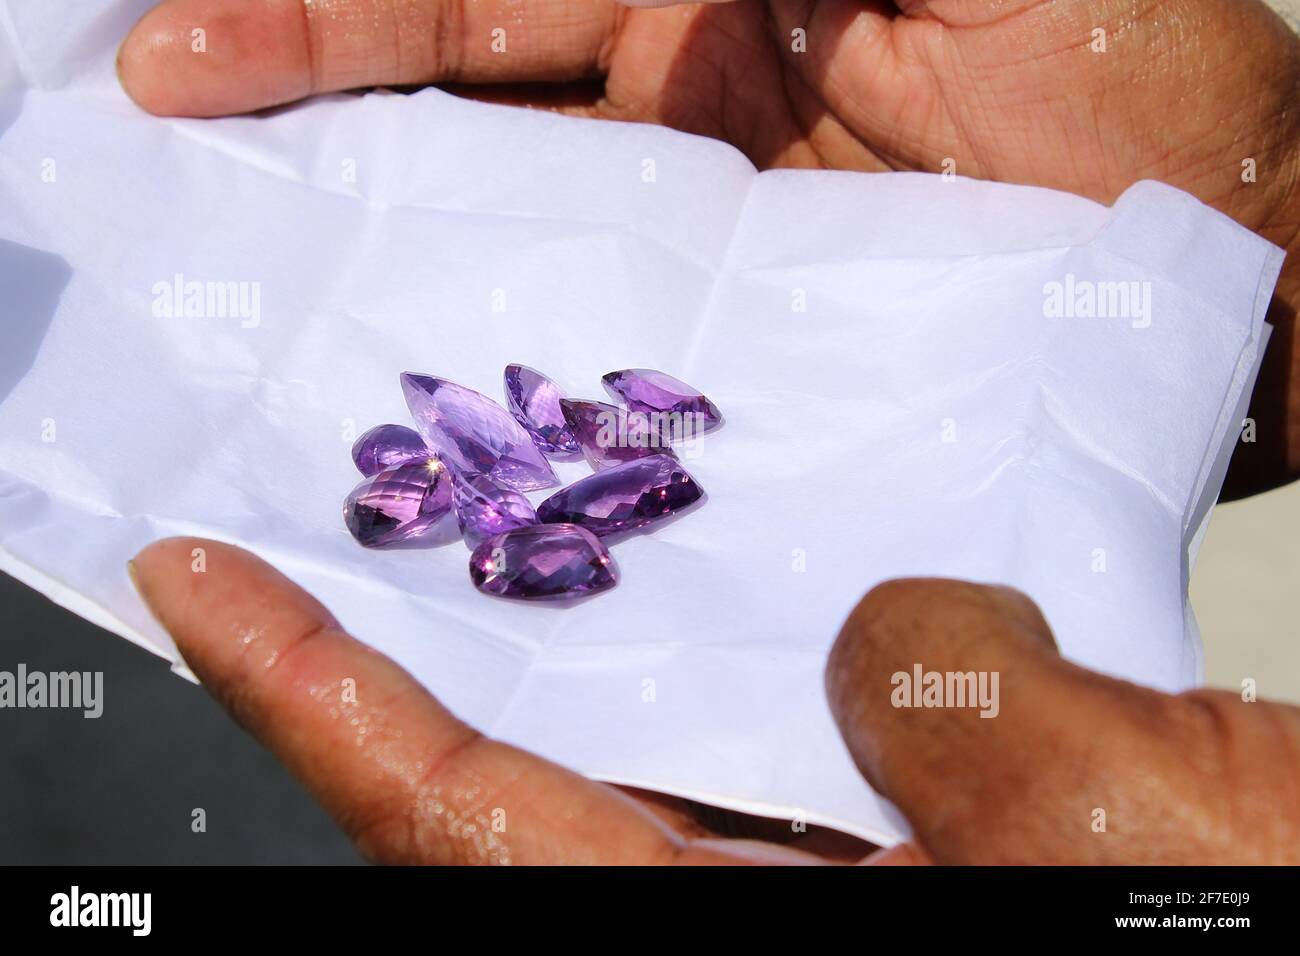 Men hands with purple gem stones on piece of white paper Stock Photo